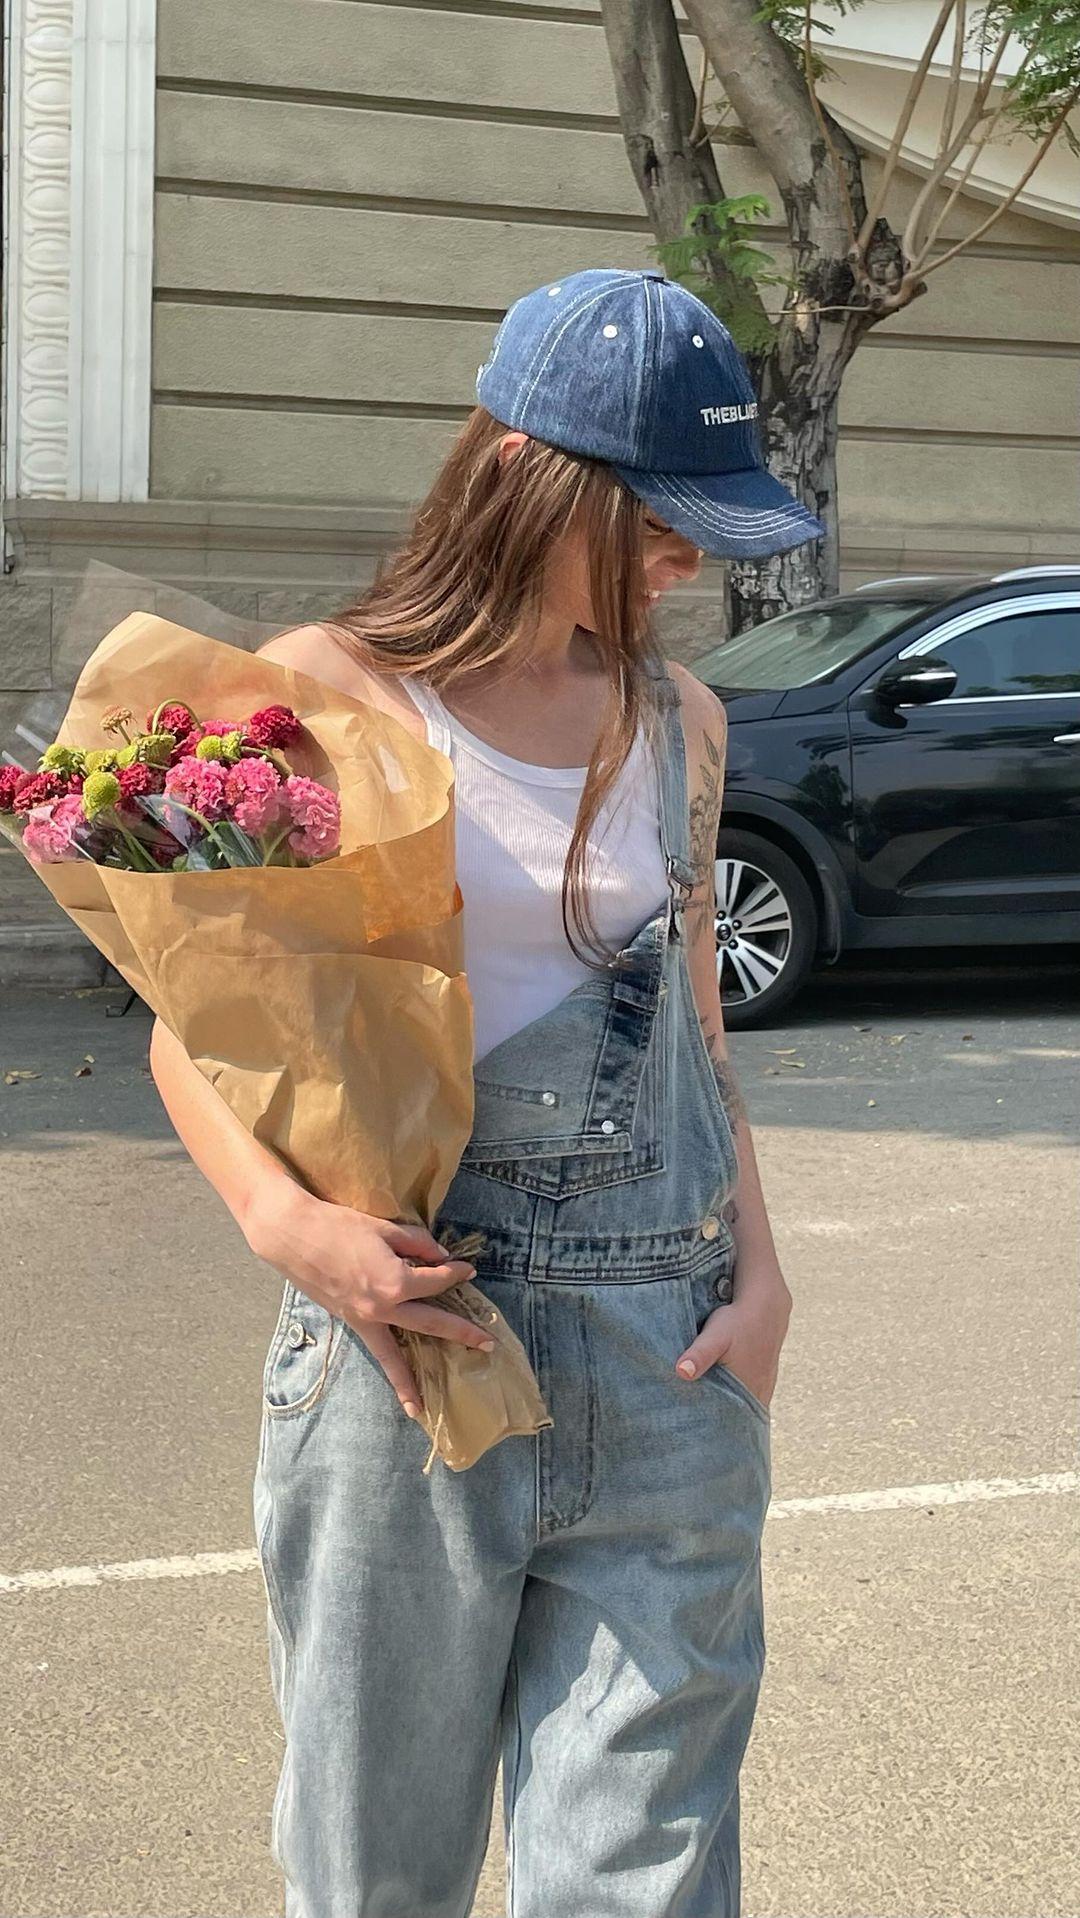 class="content__text"
 It’s time for overalls 👒☀️🍃

🎨 Outfit details: 
Blue Denim Cap
Real Tank - White 
The Original Denim Overalls - Painter Vintage Wash 

 #thebluetshirt #overall #denim #outfitinspiration 
 